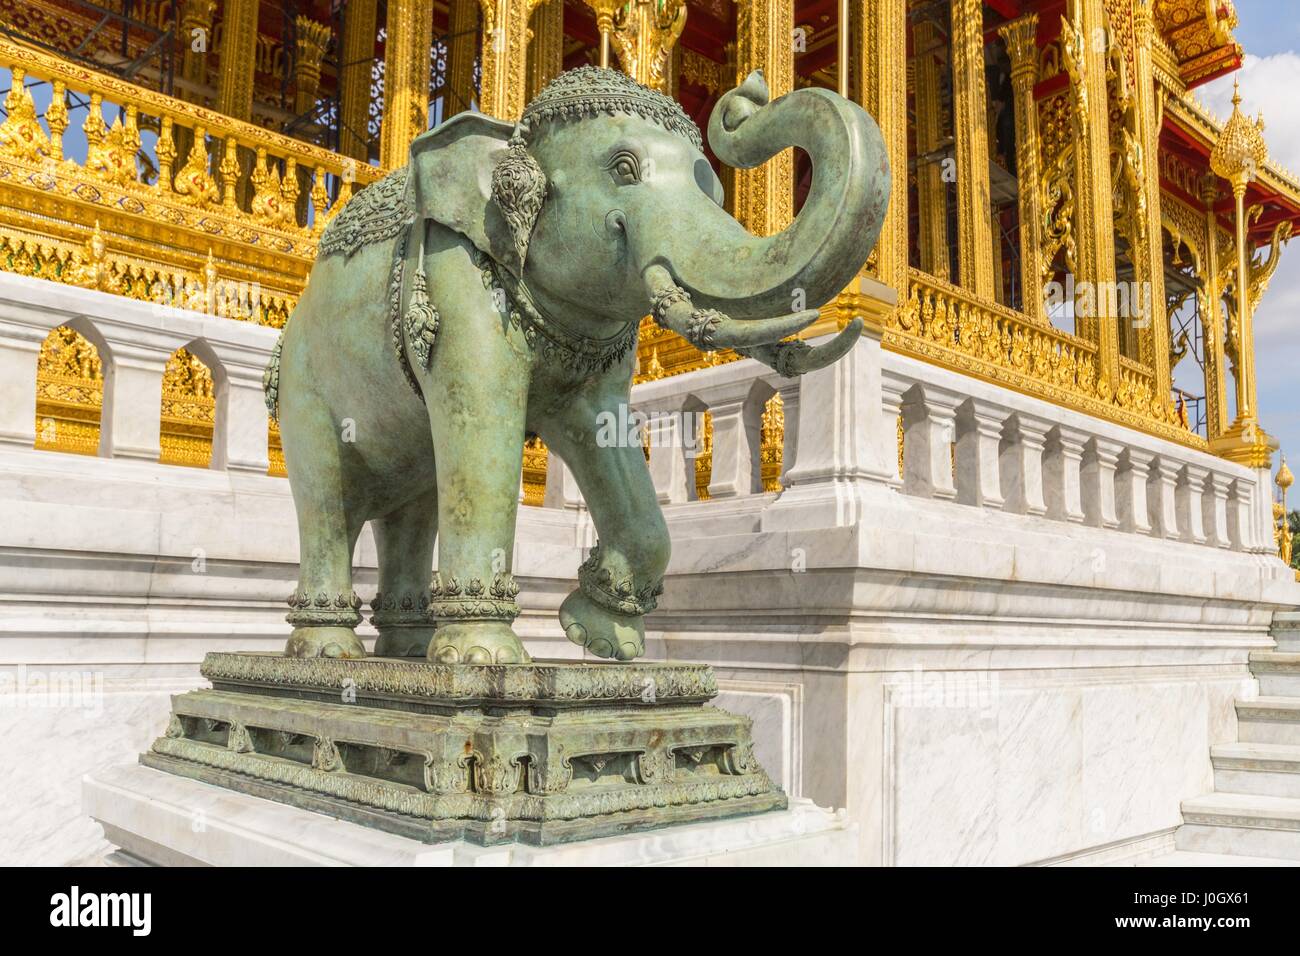 Elephant in front of Memorial Crowns of the Auspice, The Borommangalanusarani Pavilion in the area of Ananta Samakhom Throne Hall in Thai Royal Dusit  Stock Photo